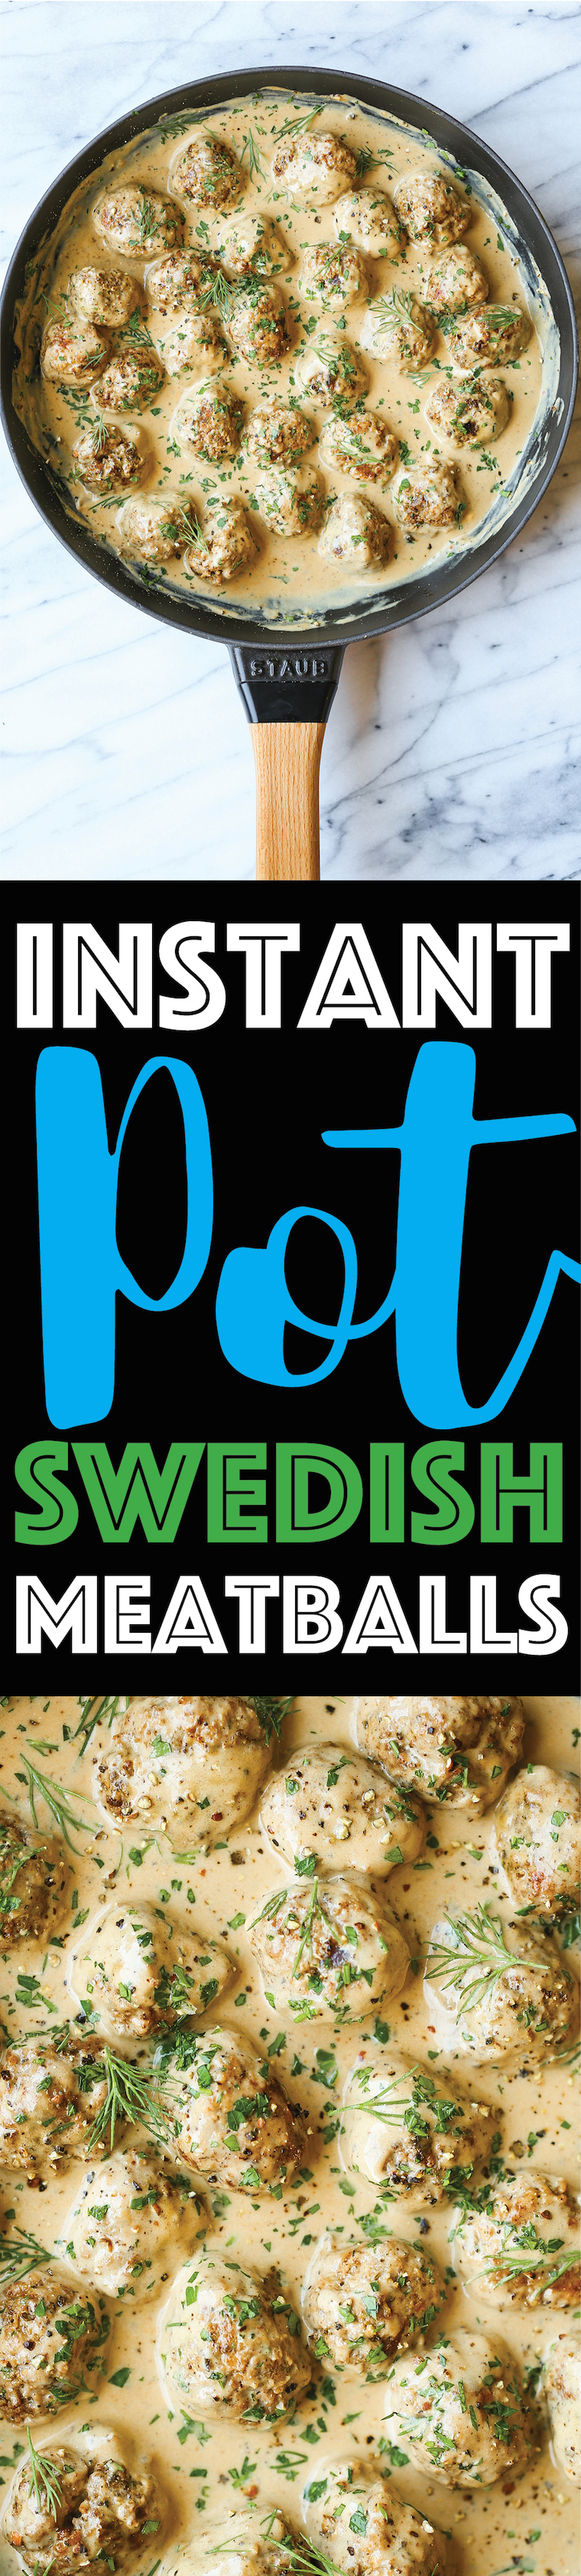 Instant Pot Swedish Meatballs - Easy peasy Swedish meatballs made in your pressure cooker! The meatballs are so tender and the gravy is so rich and creamy!